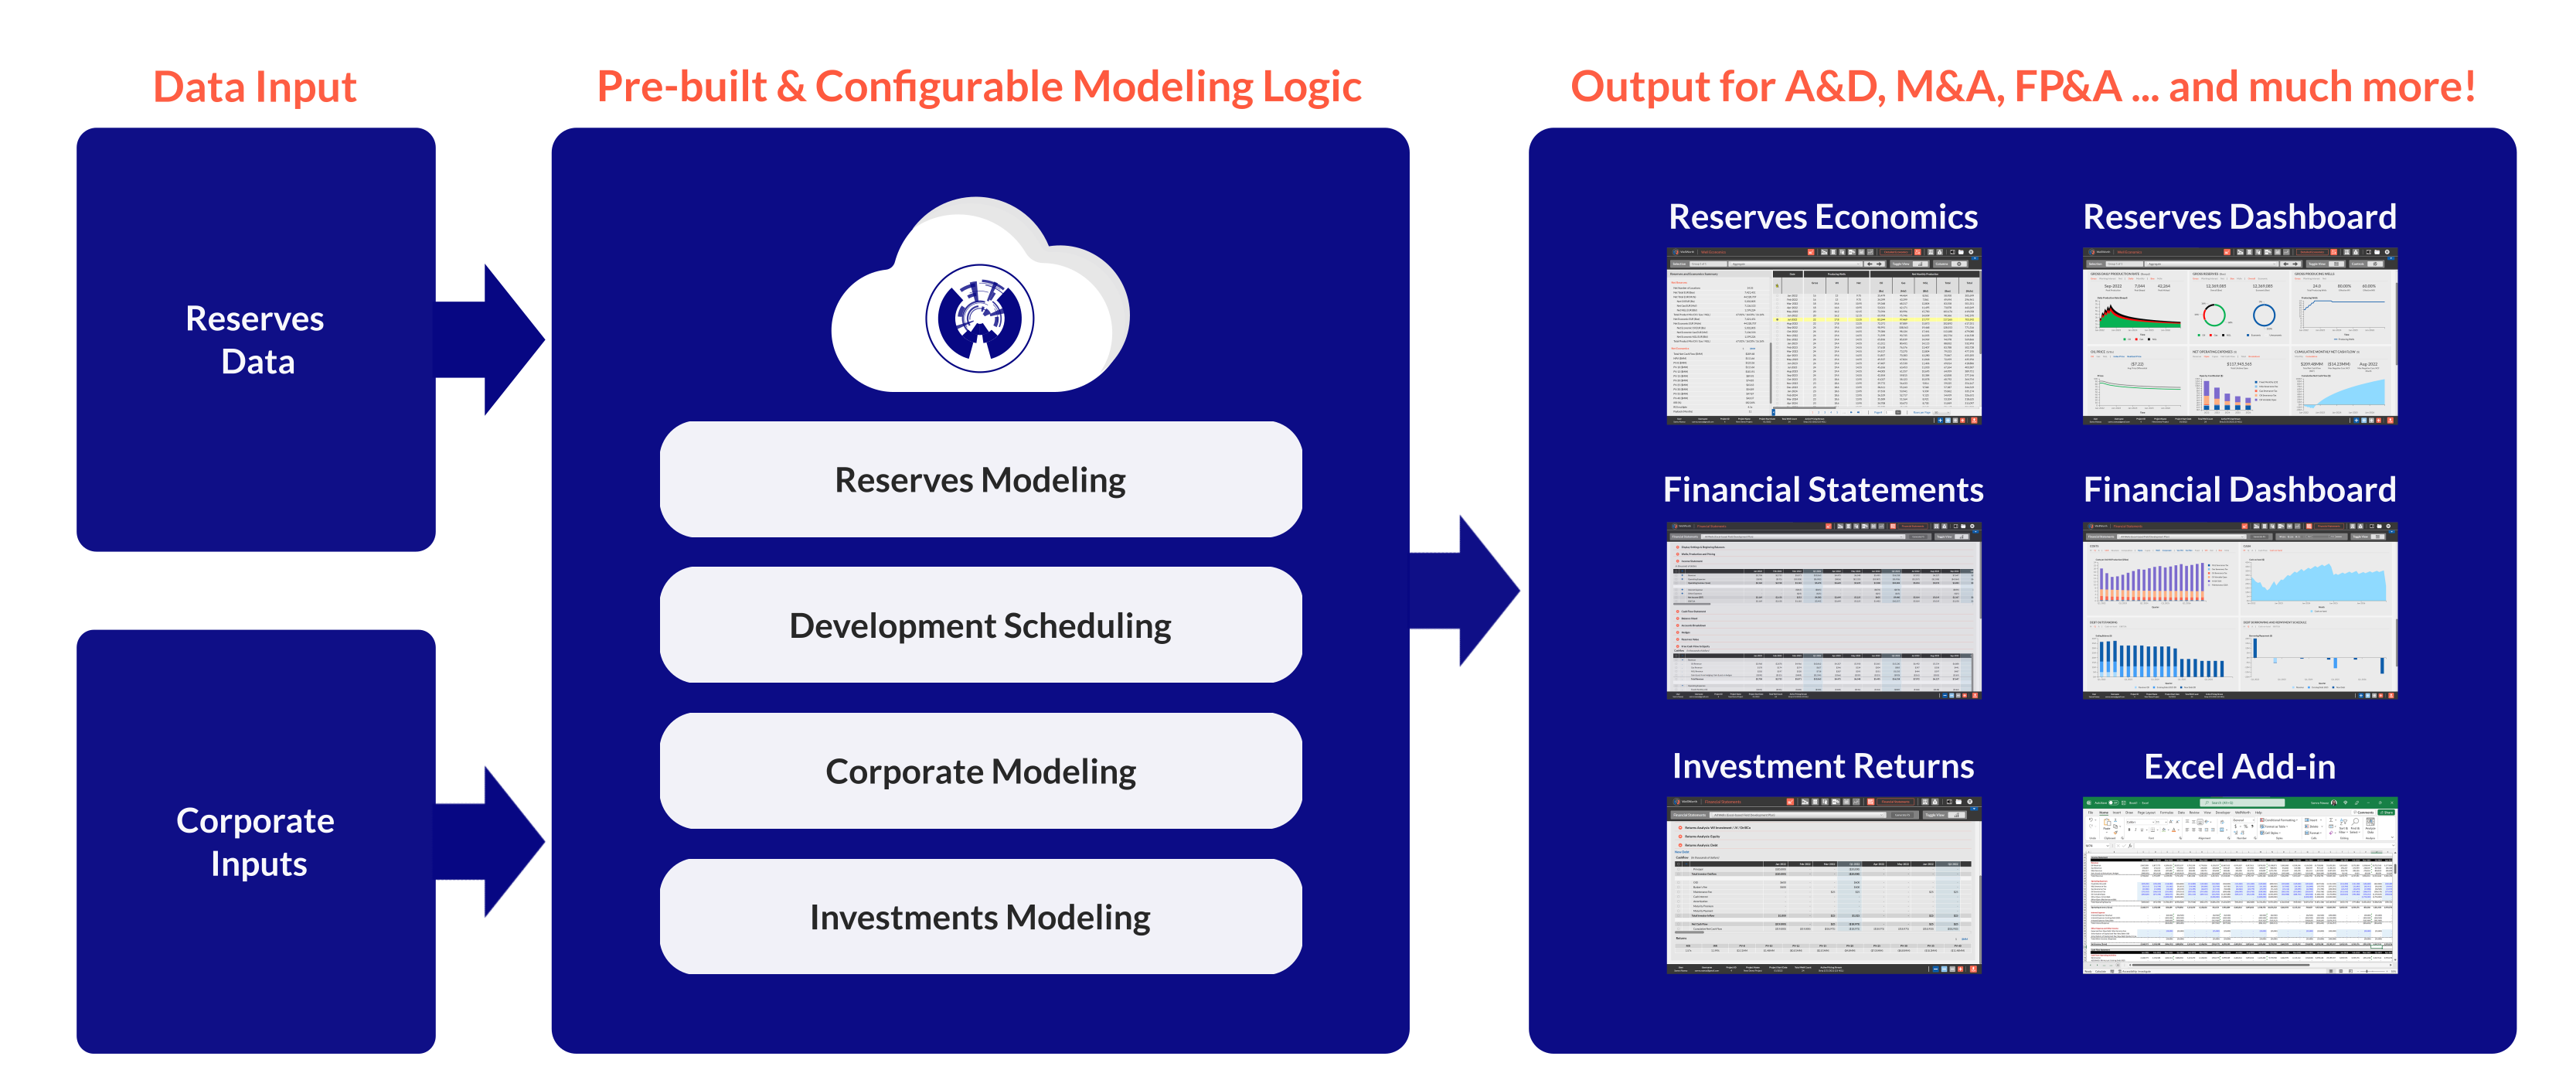 Input (Oil & Gas Reserves + Corporate Inputs) -> Financial Modeling Logic -> Output for A&D, M&A, FP&A